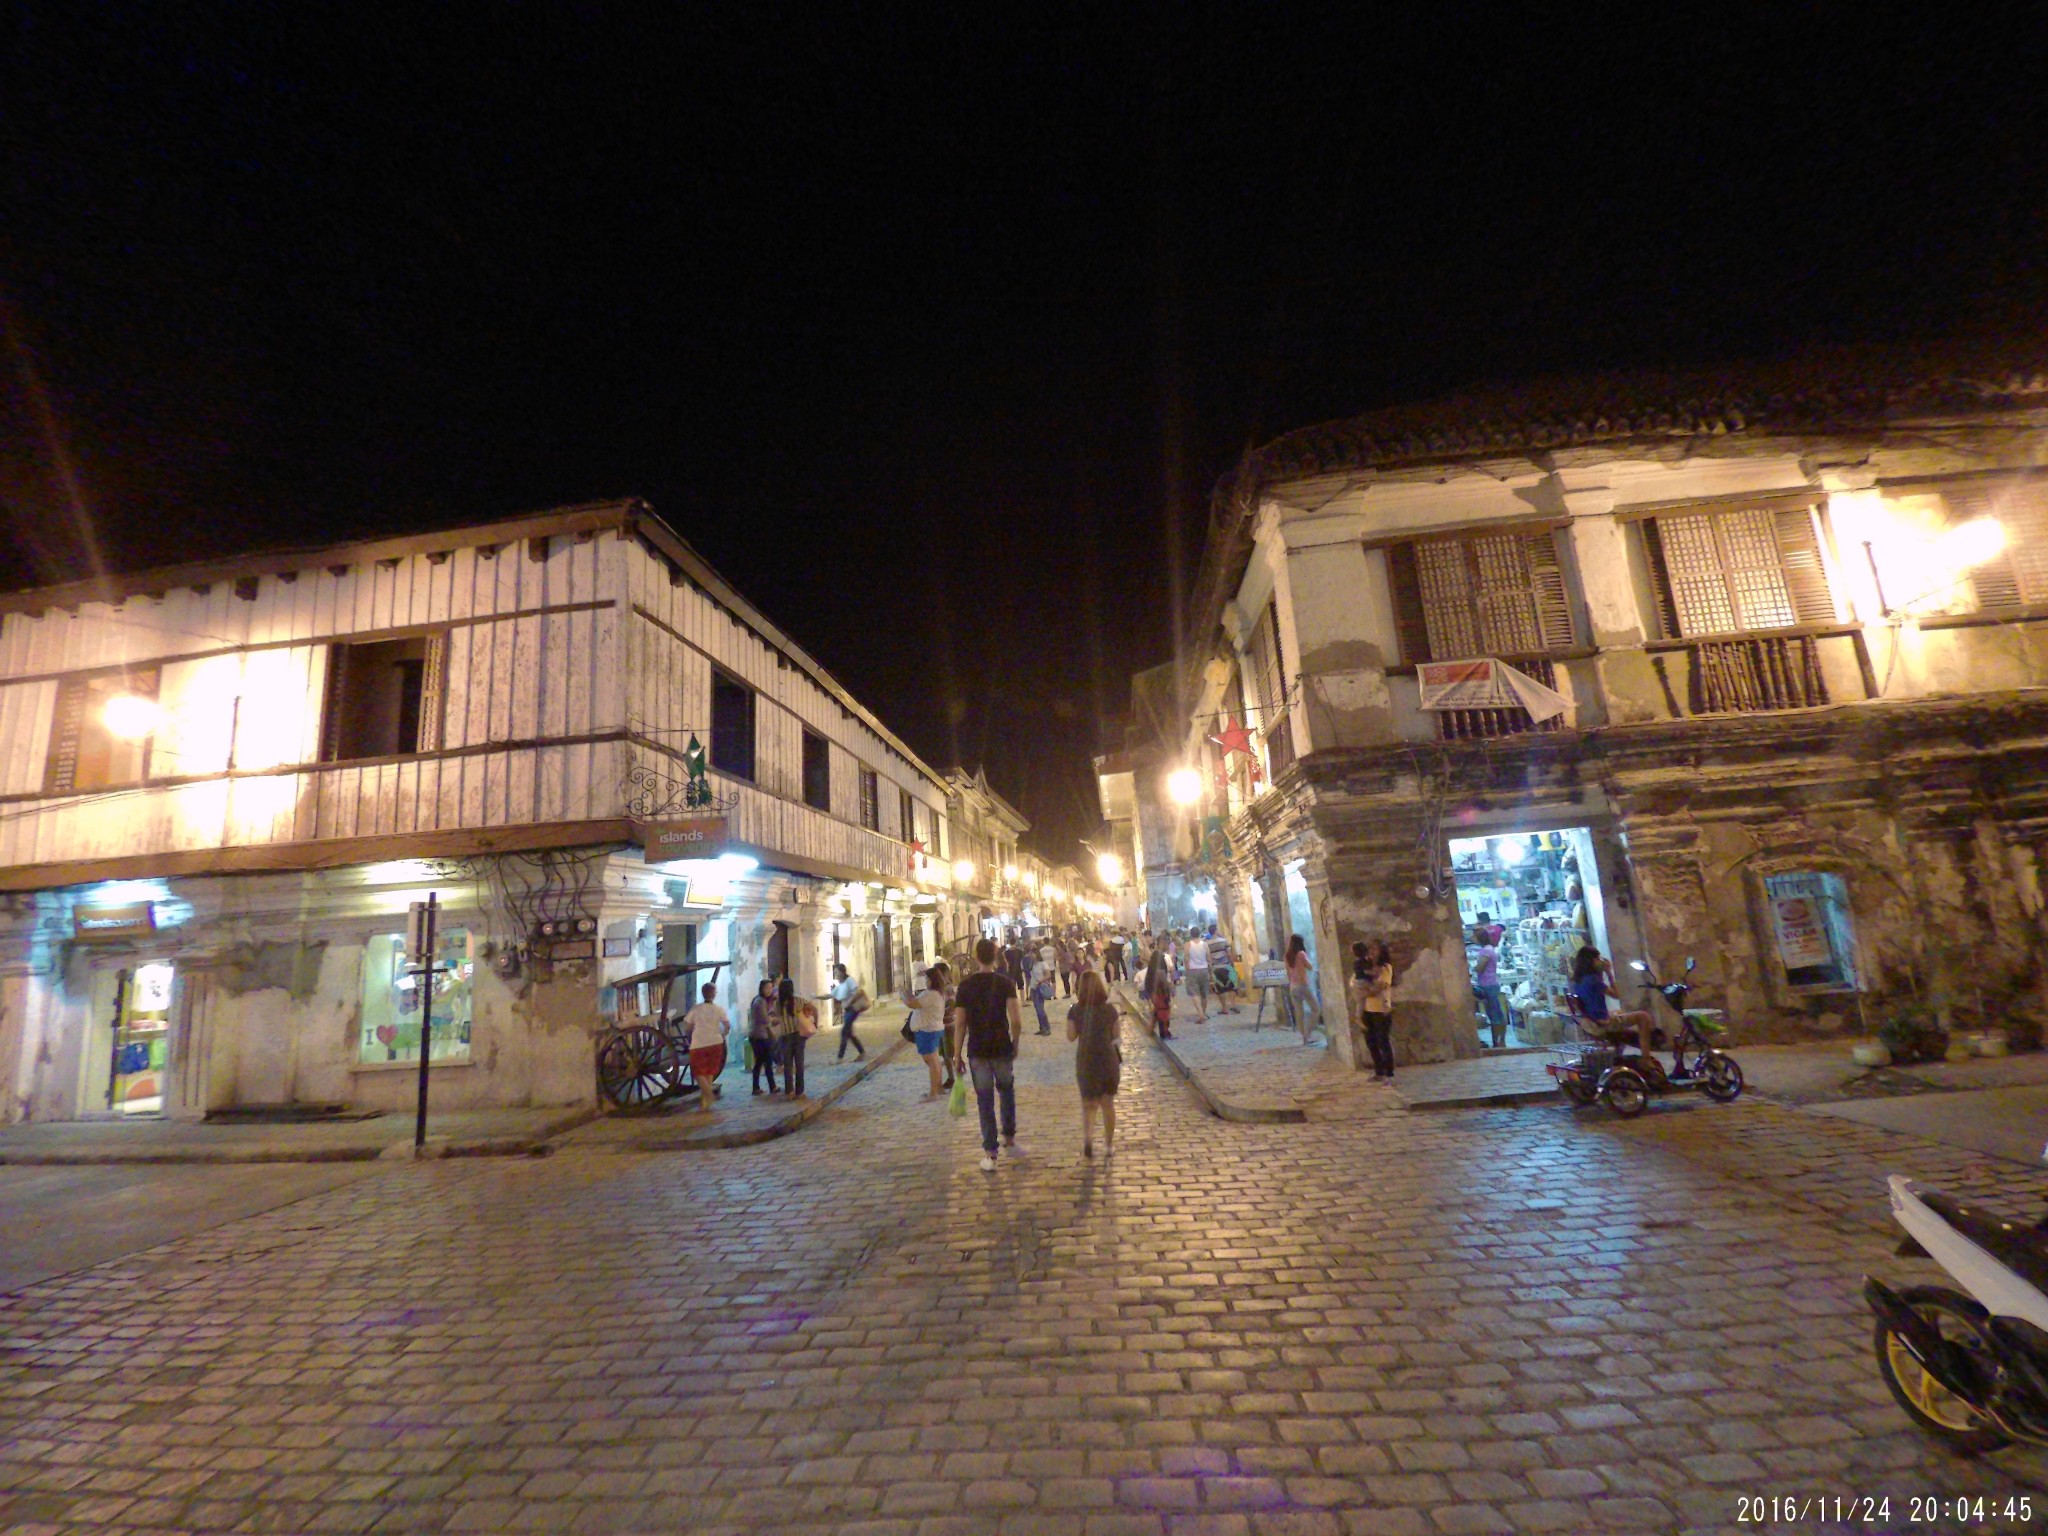 Get Artistic in National Museum, Cafe Leona and Calle Crisologo at Night (Vigan Day 1, Part 2)